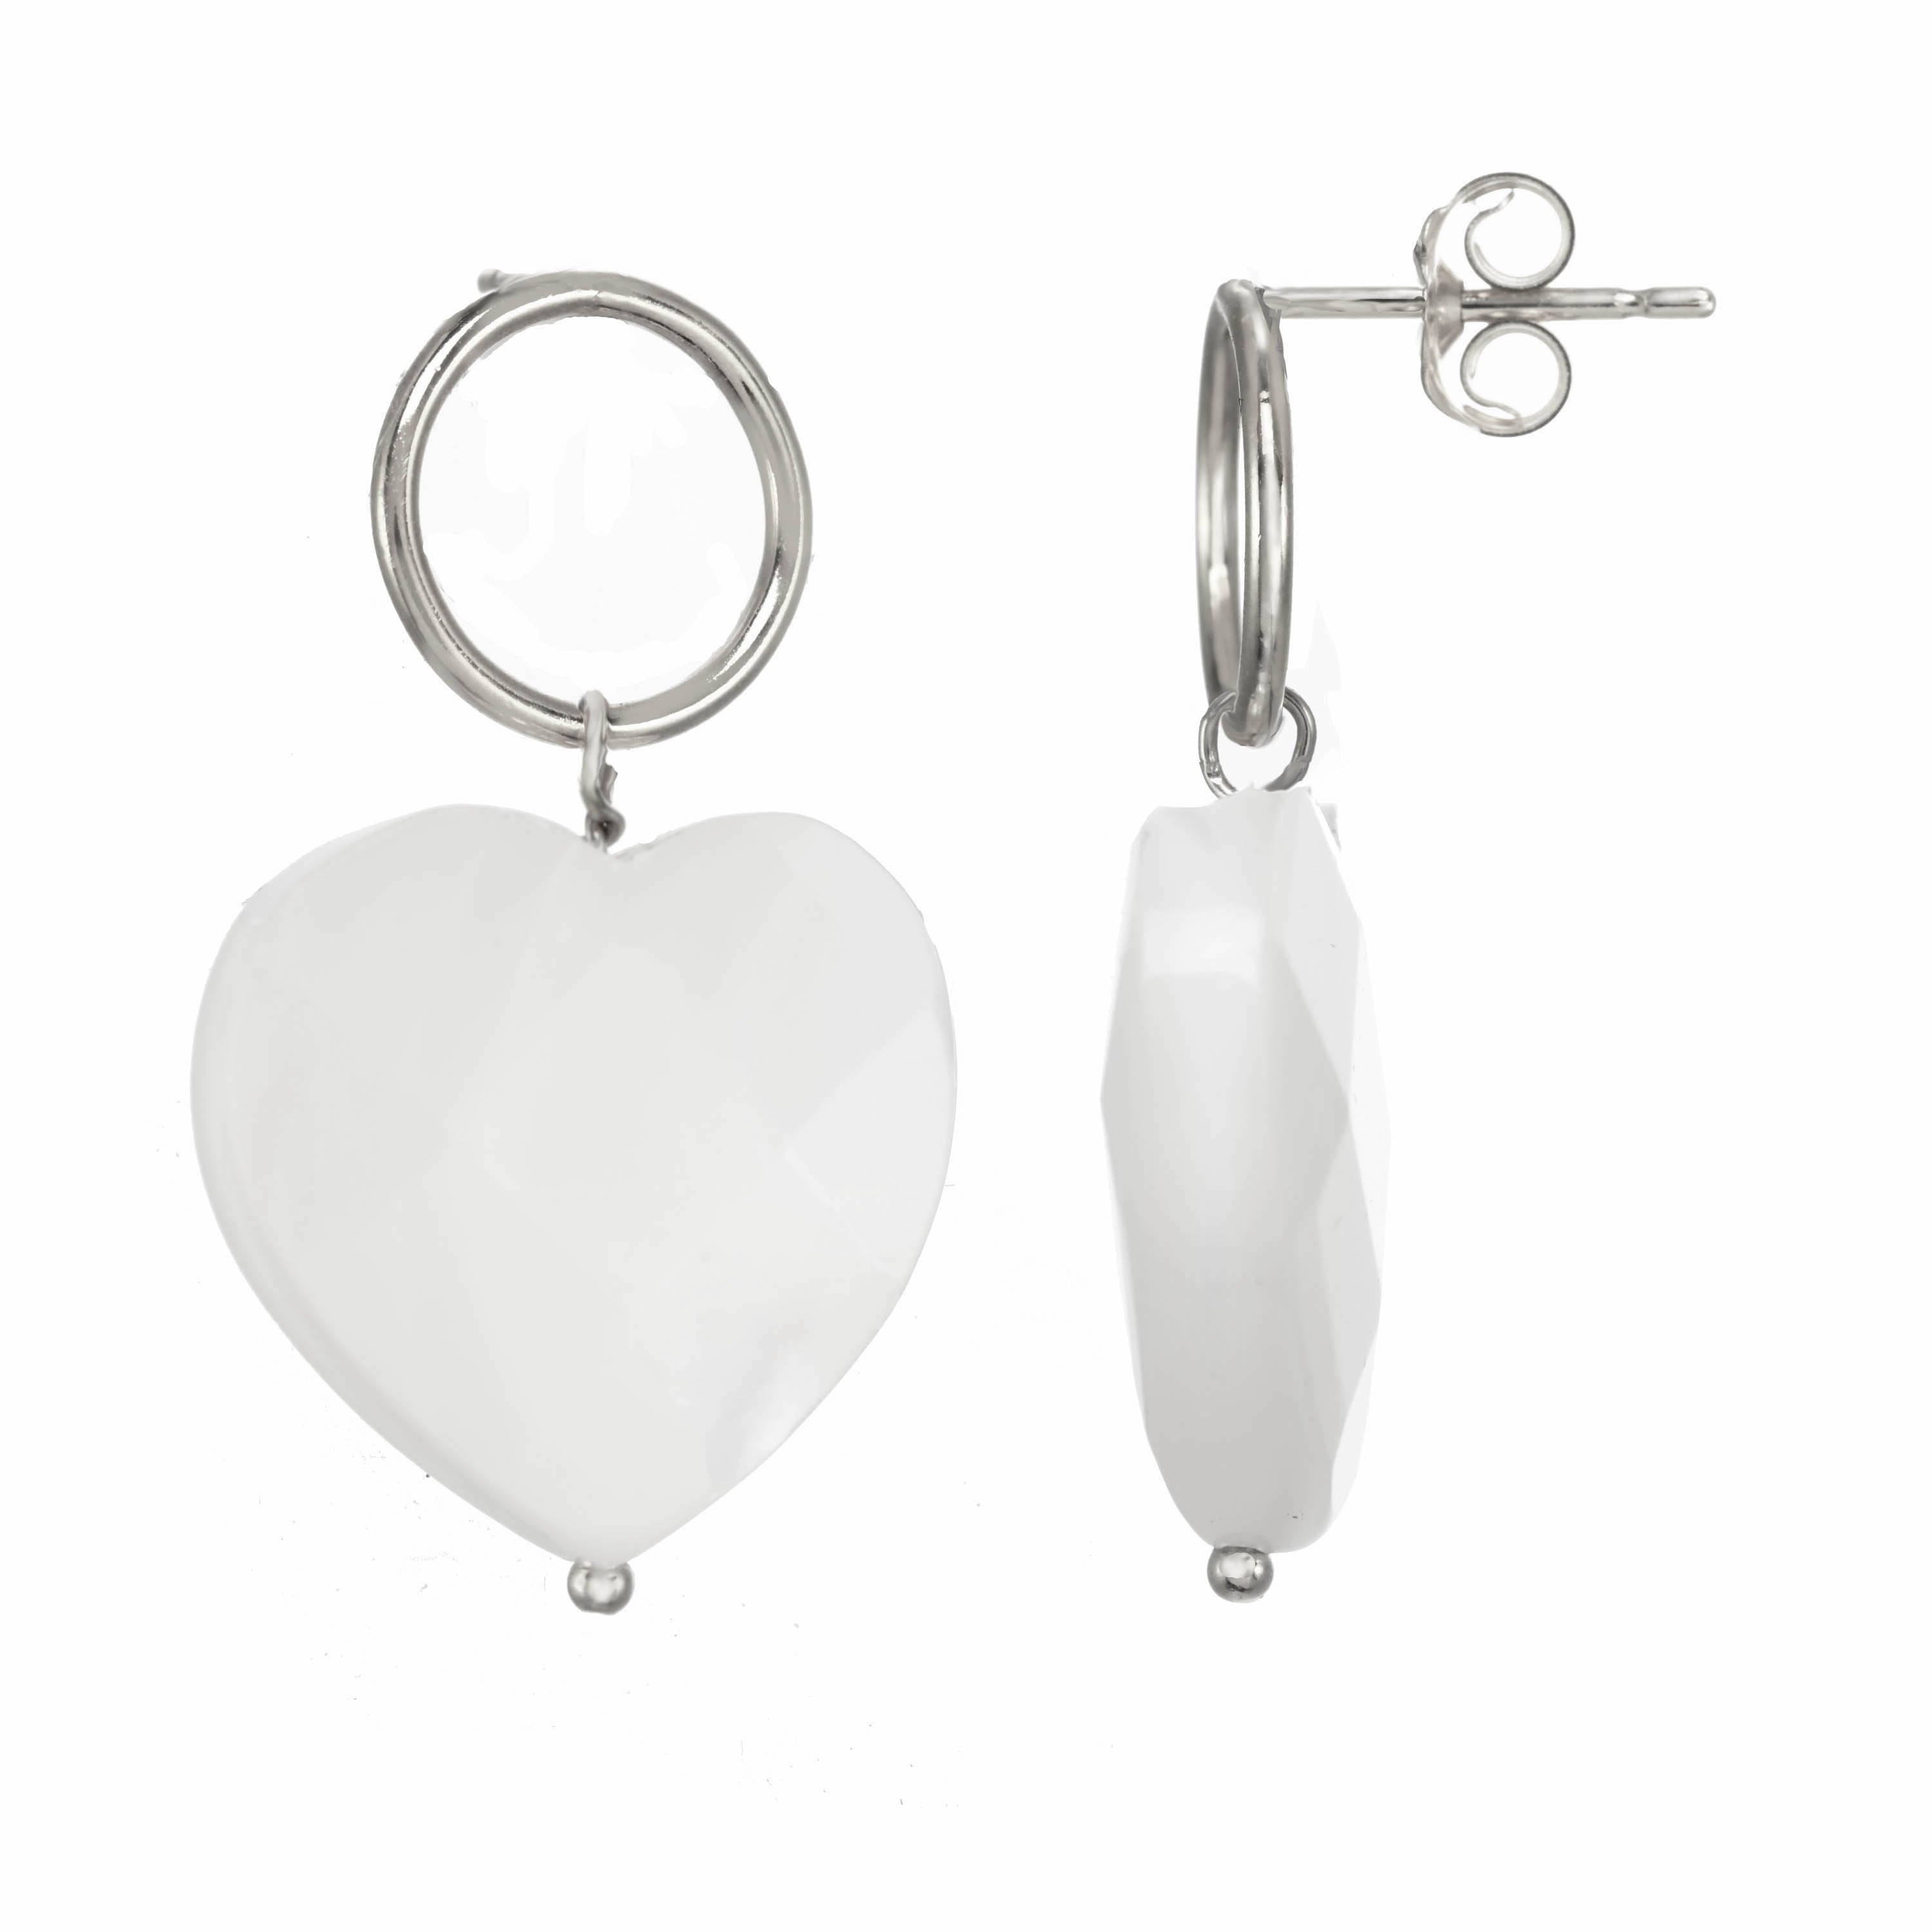 Heart Earrings by KOZAKH. Stud earrings, crafted in Sterling Silver, with hoop and hand carved faceted Mother of Pearl heart charm.